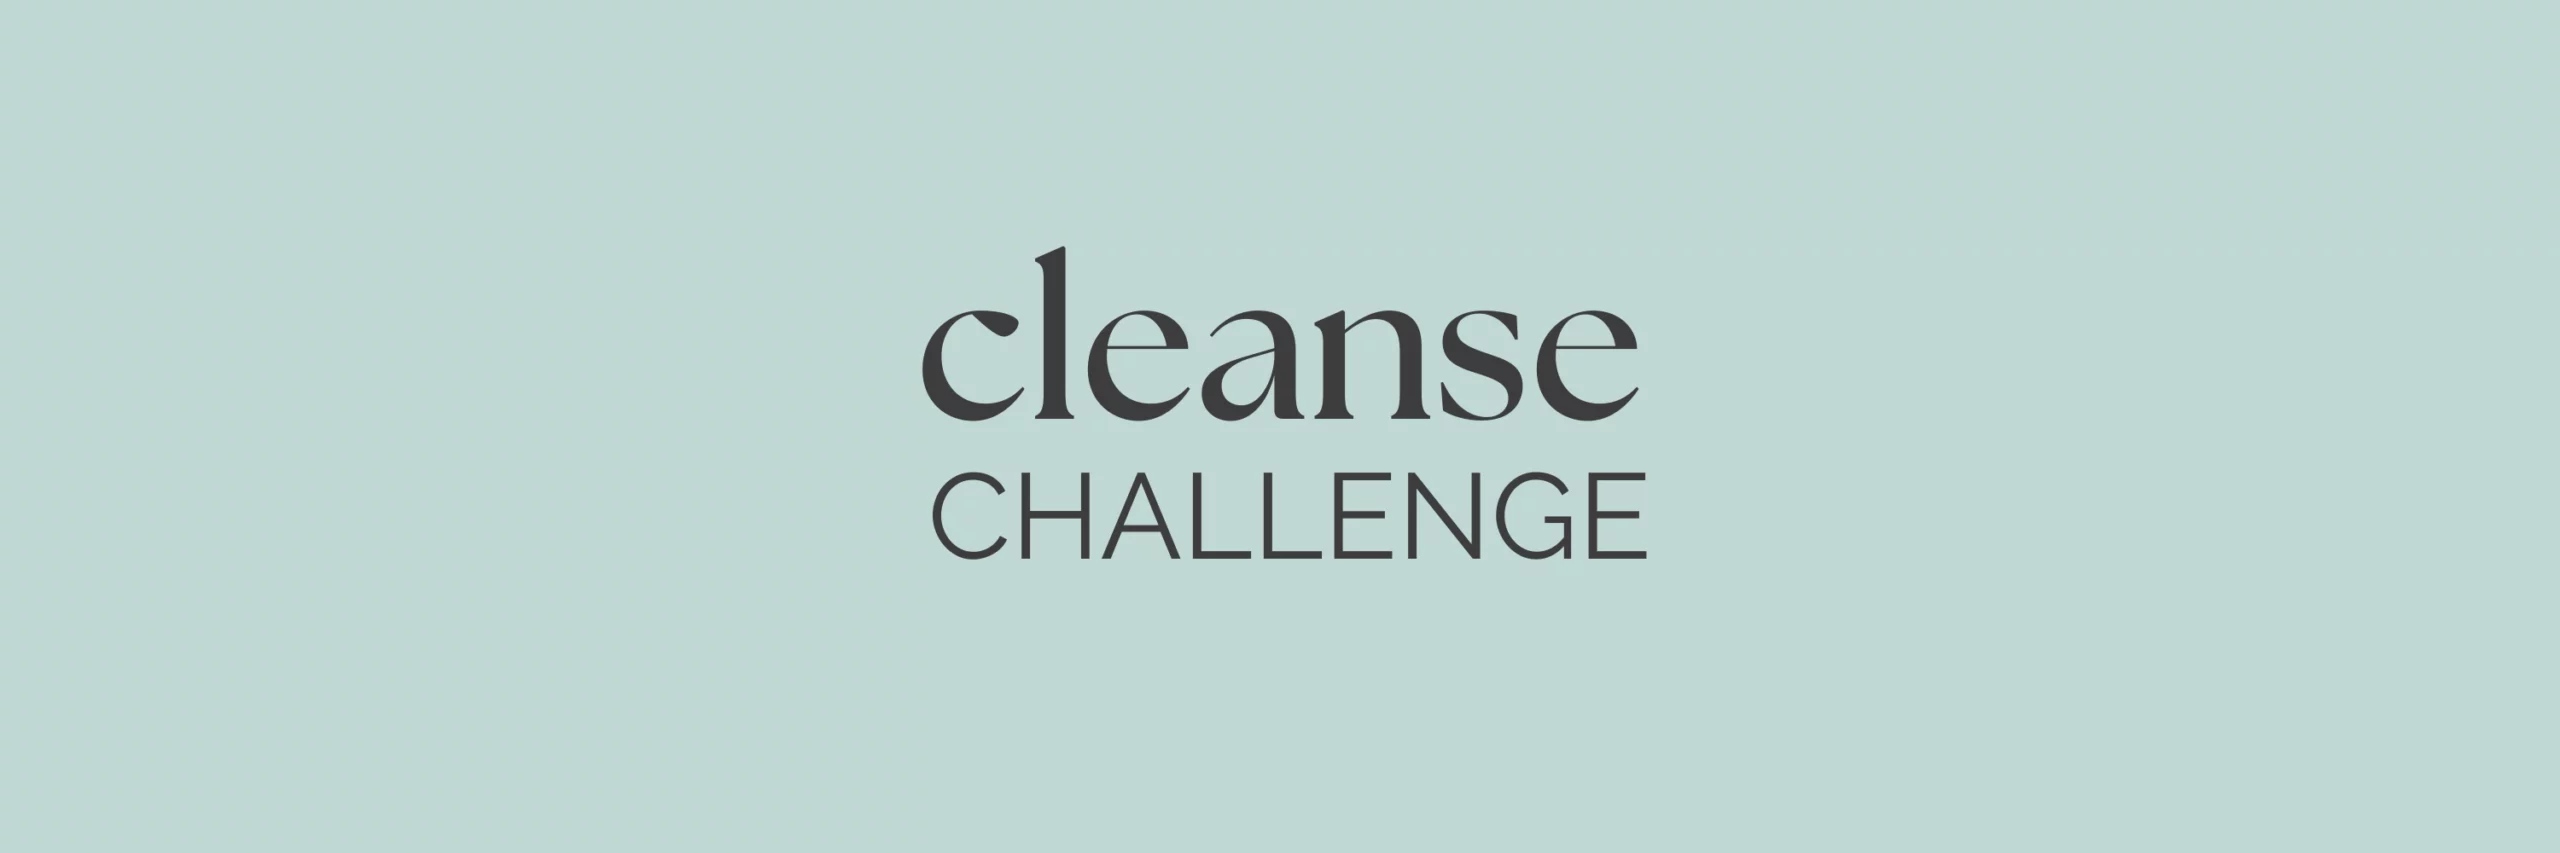 master cleanse challenge